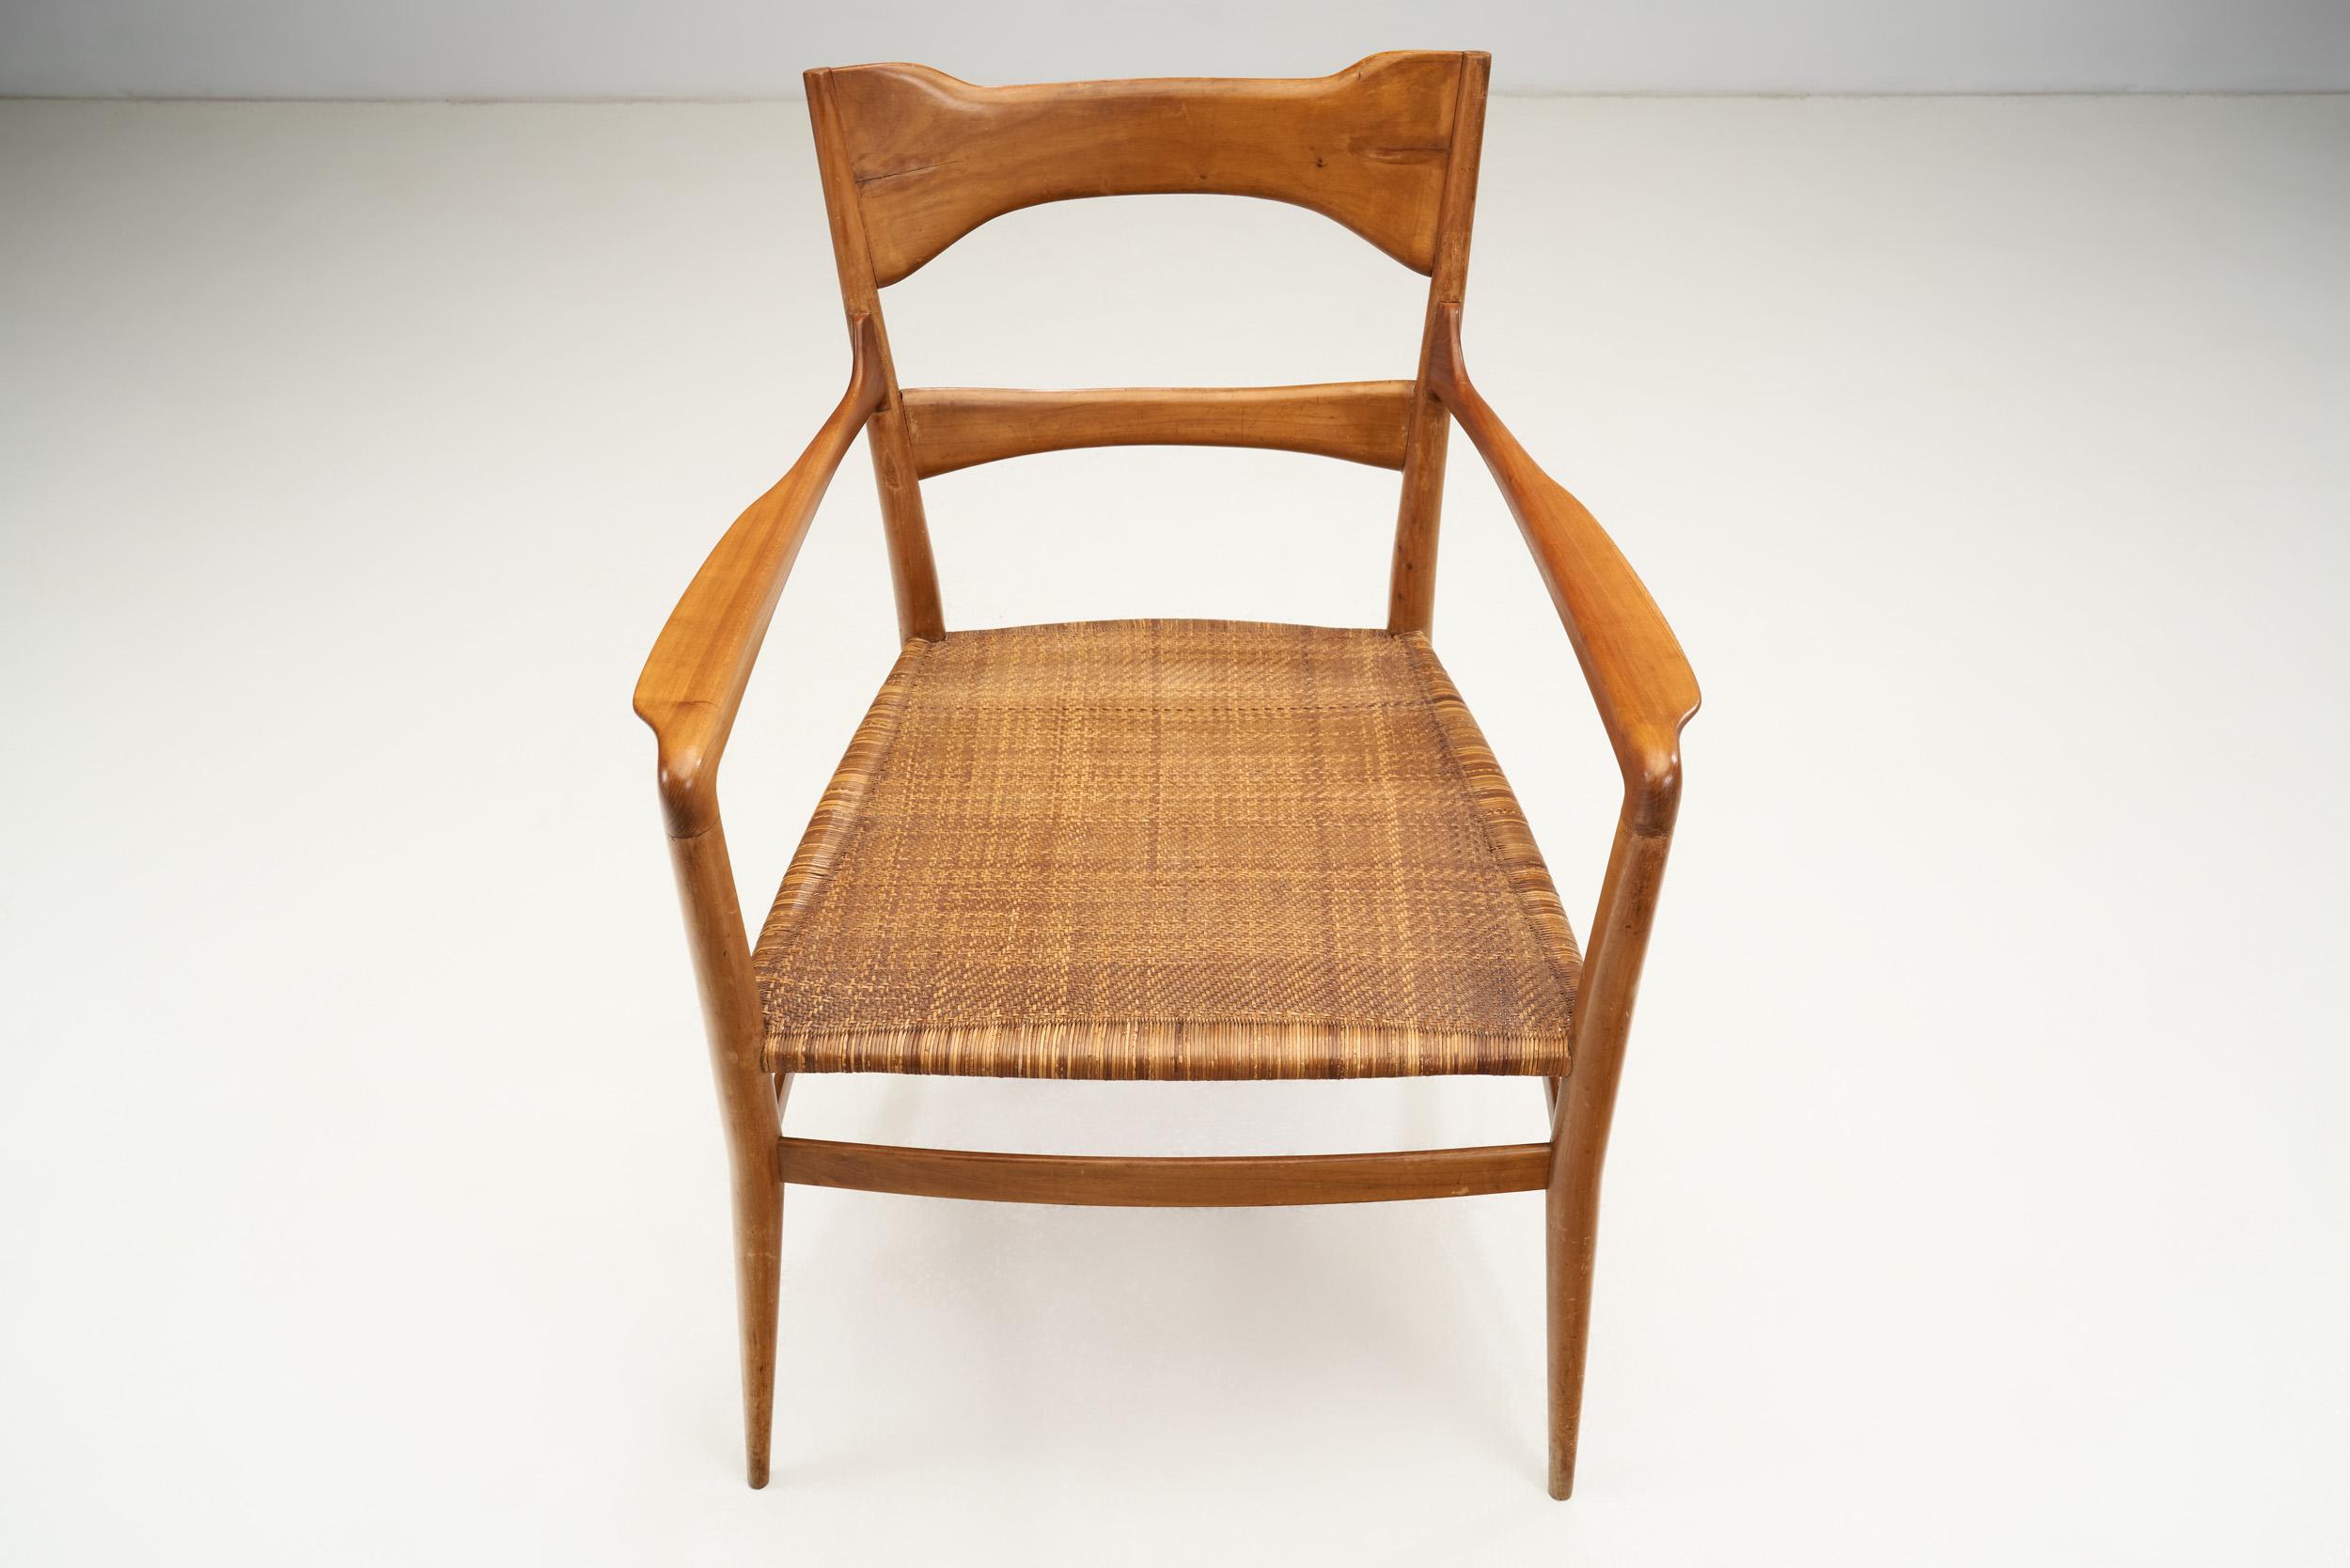 Emanuele Rambaldi Fruitwood Armchair with Woven Cane Seat, Italy 1950s 2